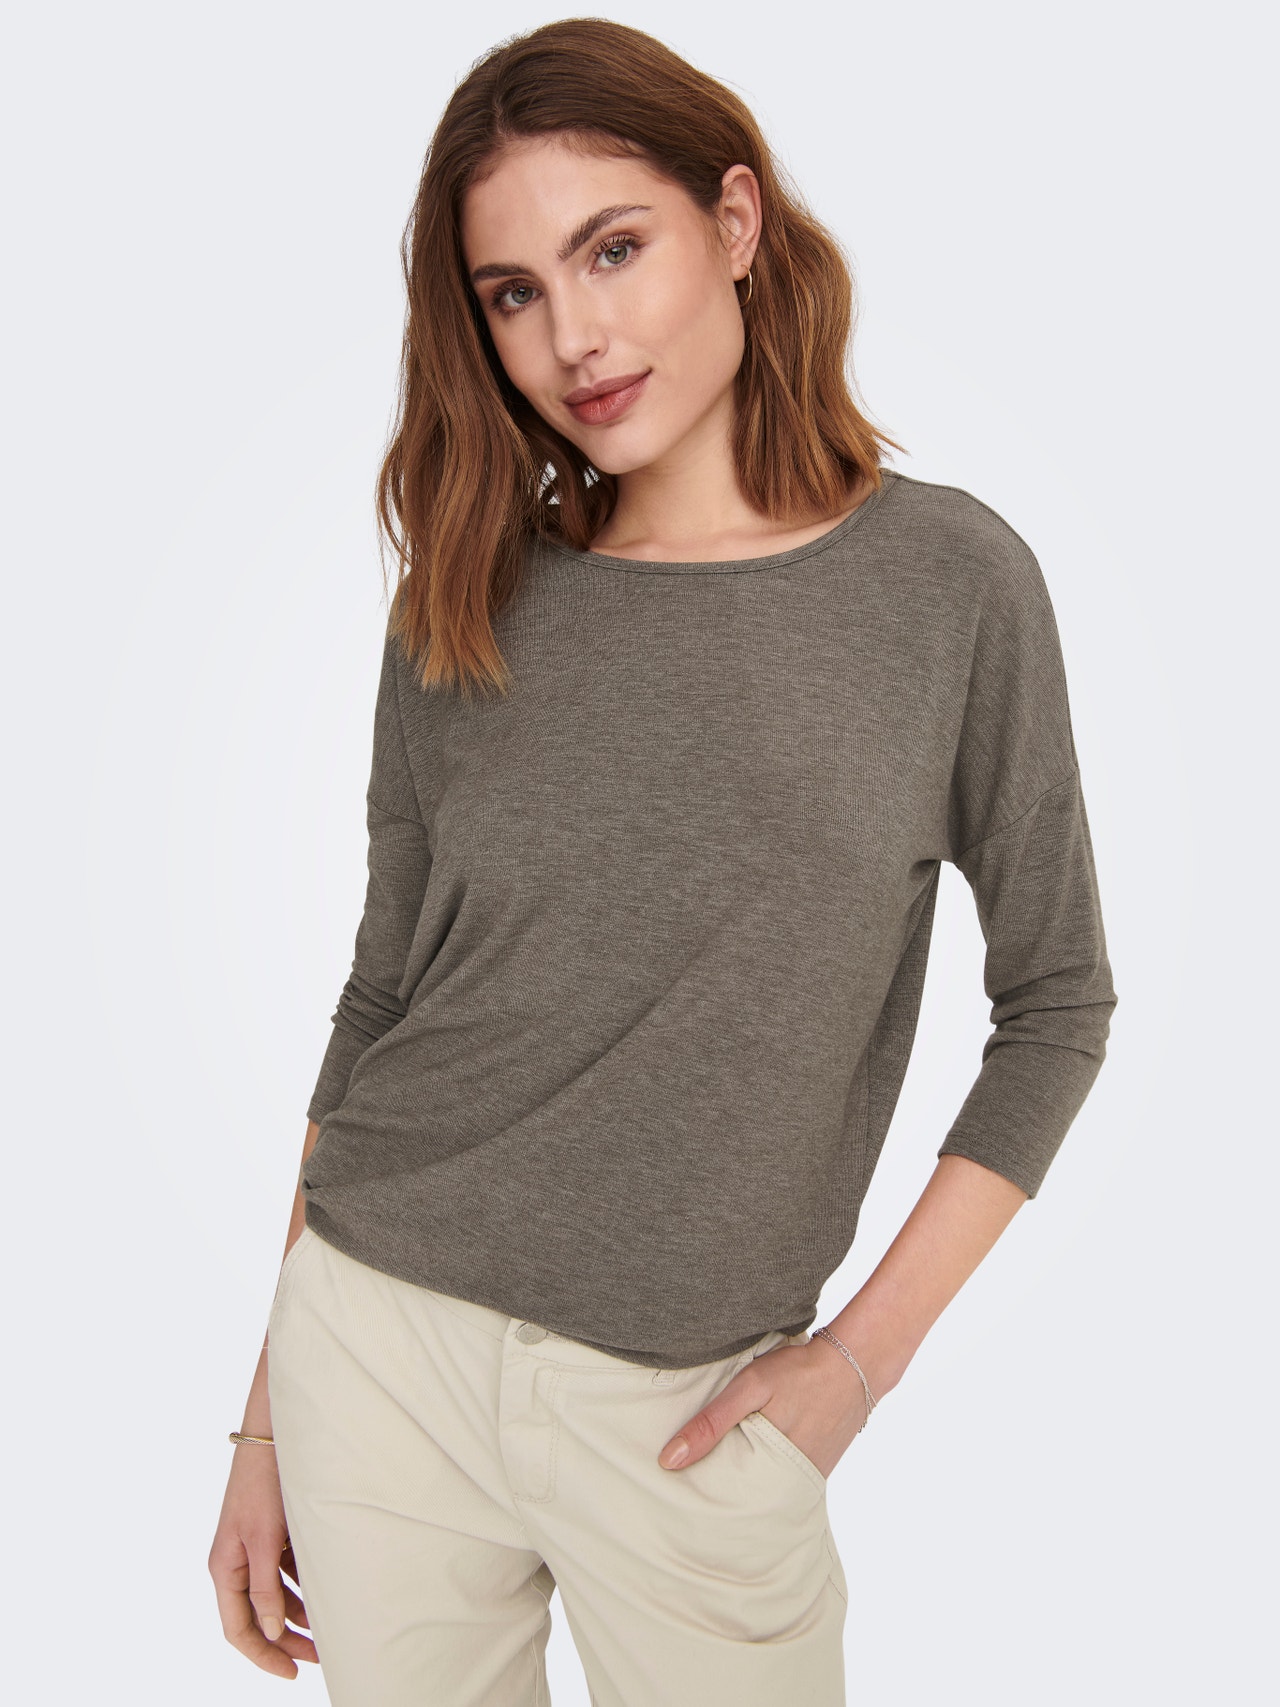 ONLY Loose fitted top -Falcon - 15157920